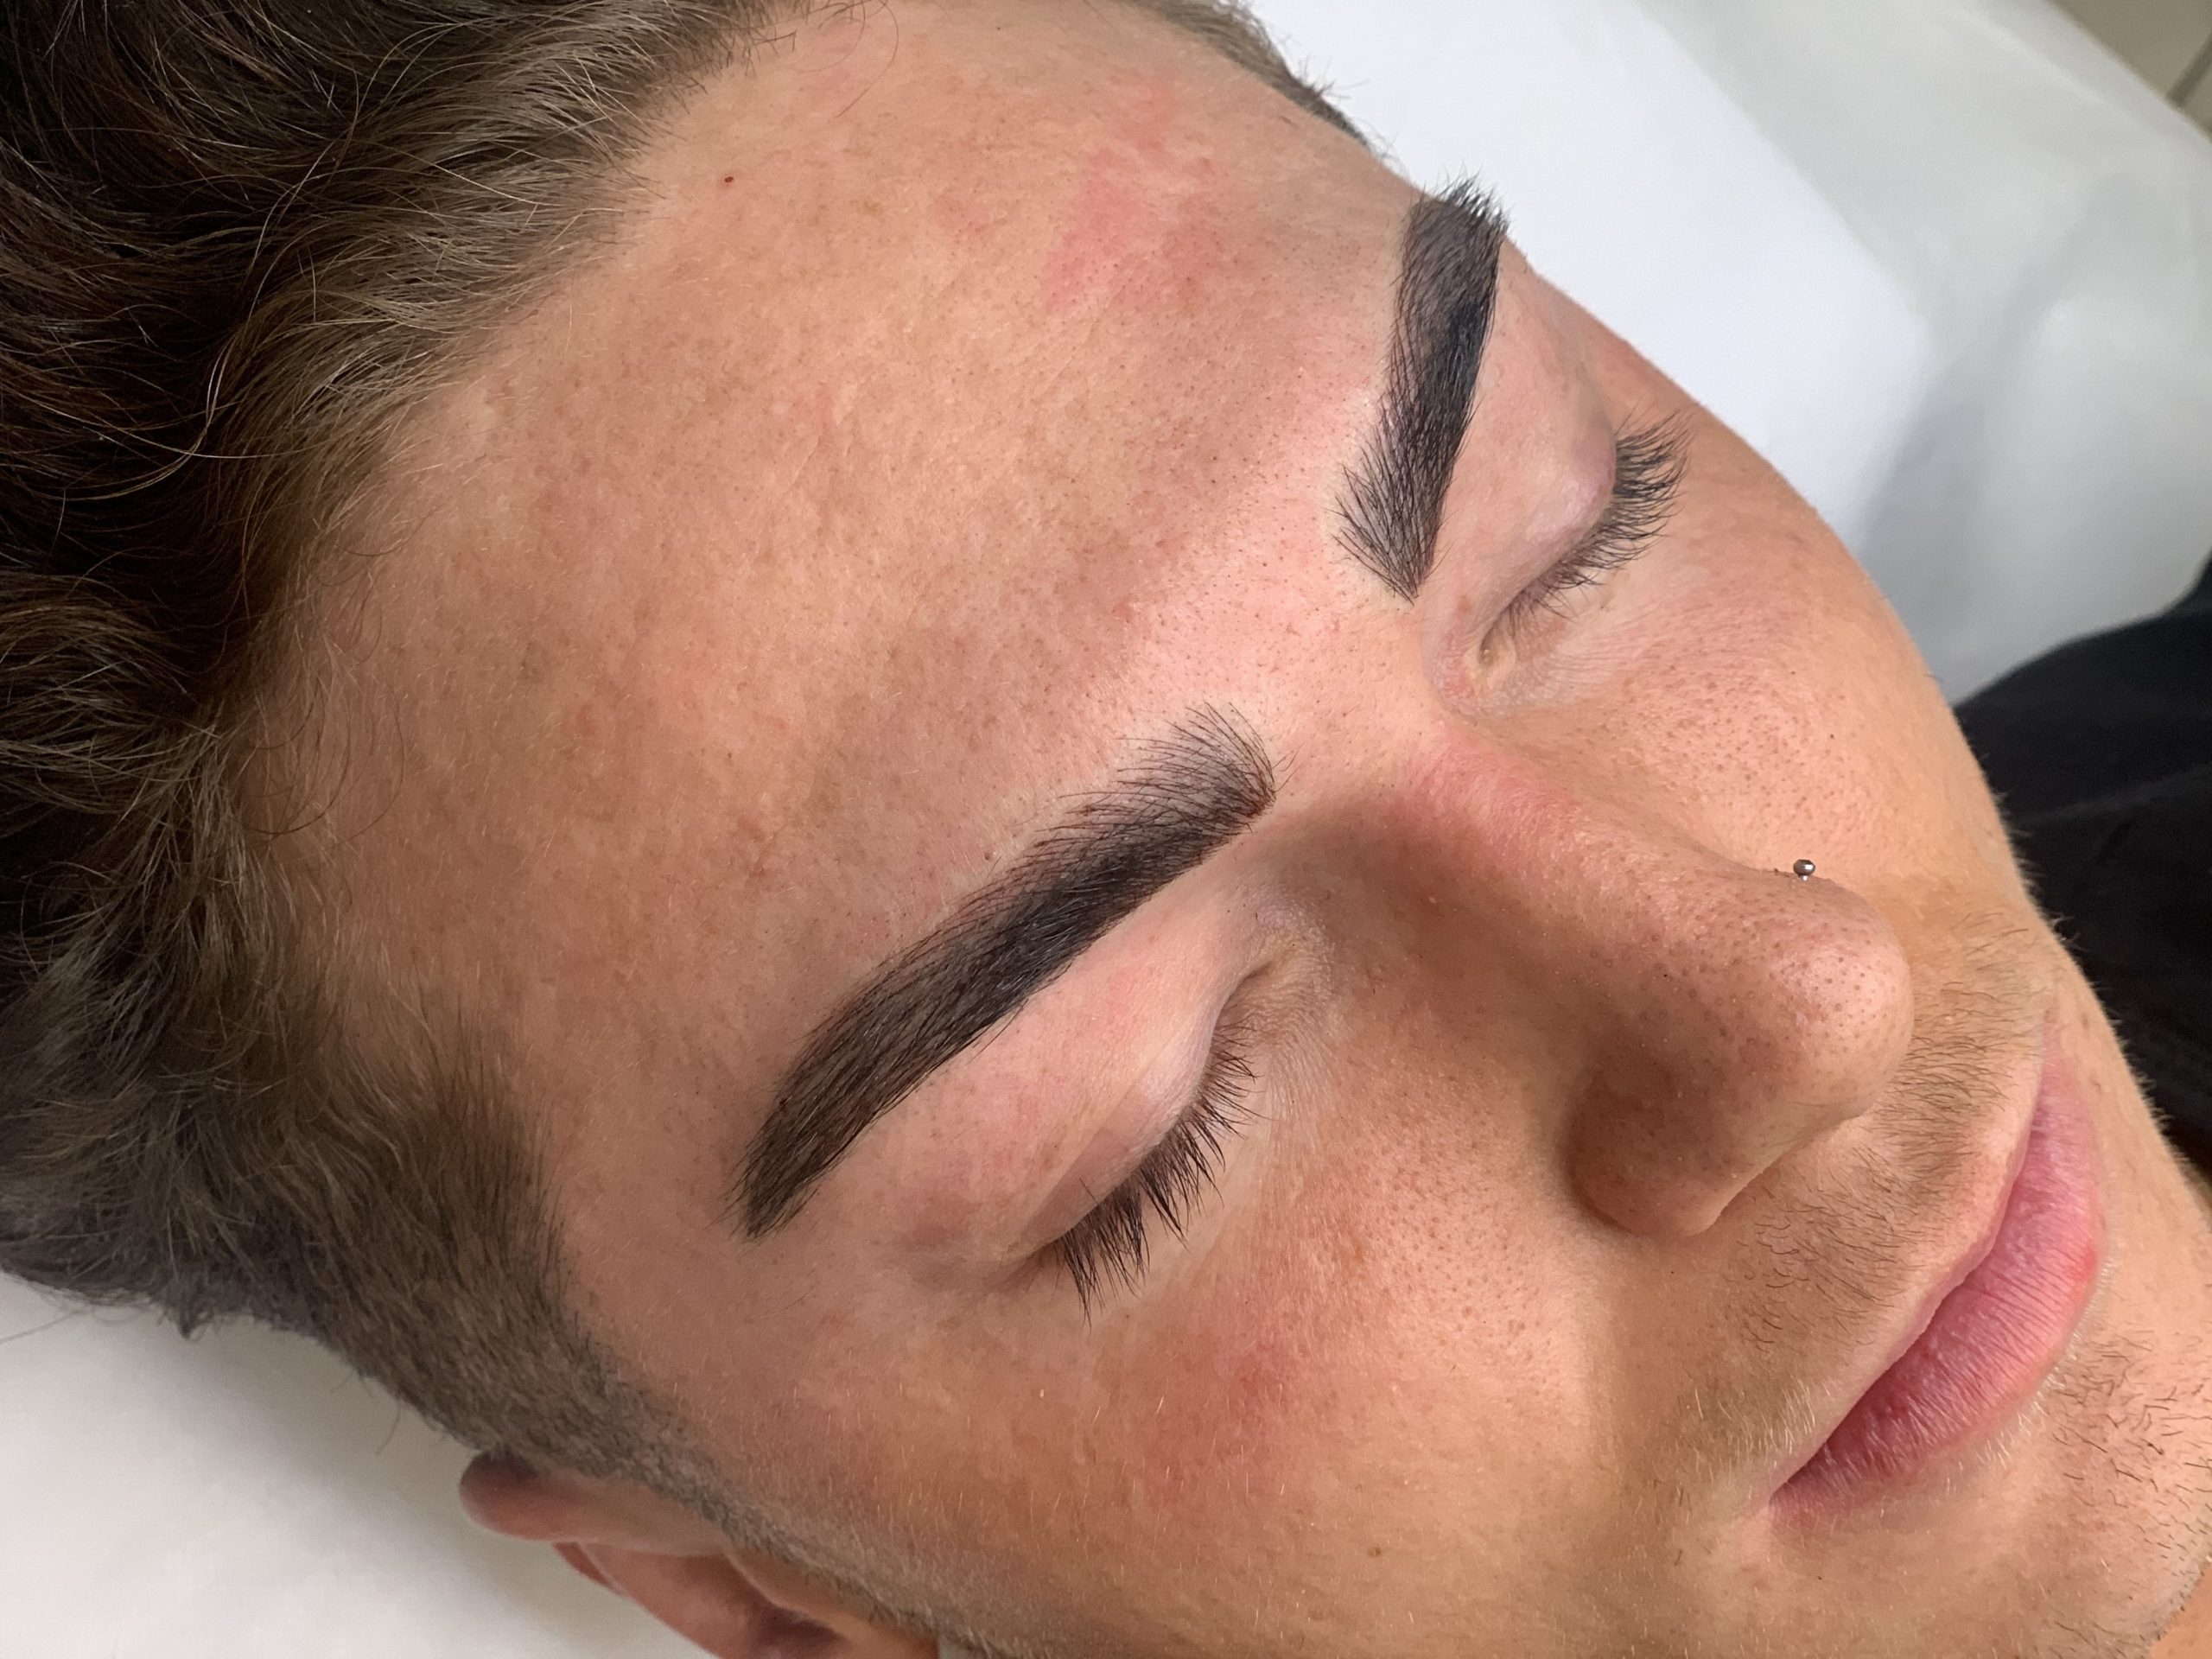 Brow Manscaping: Why Now Is Better Than Ever To Microblade Those Brows